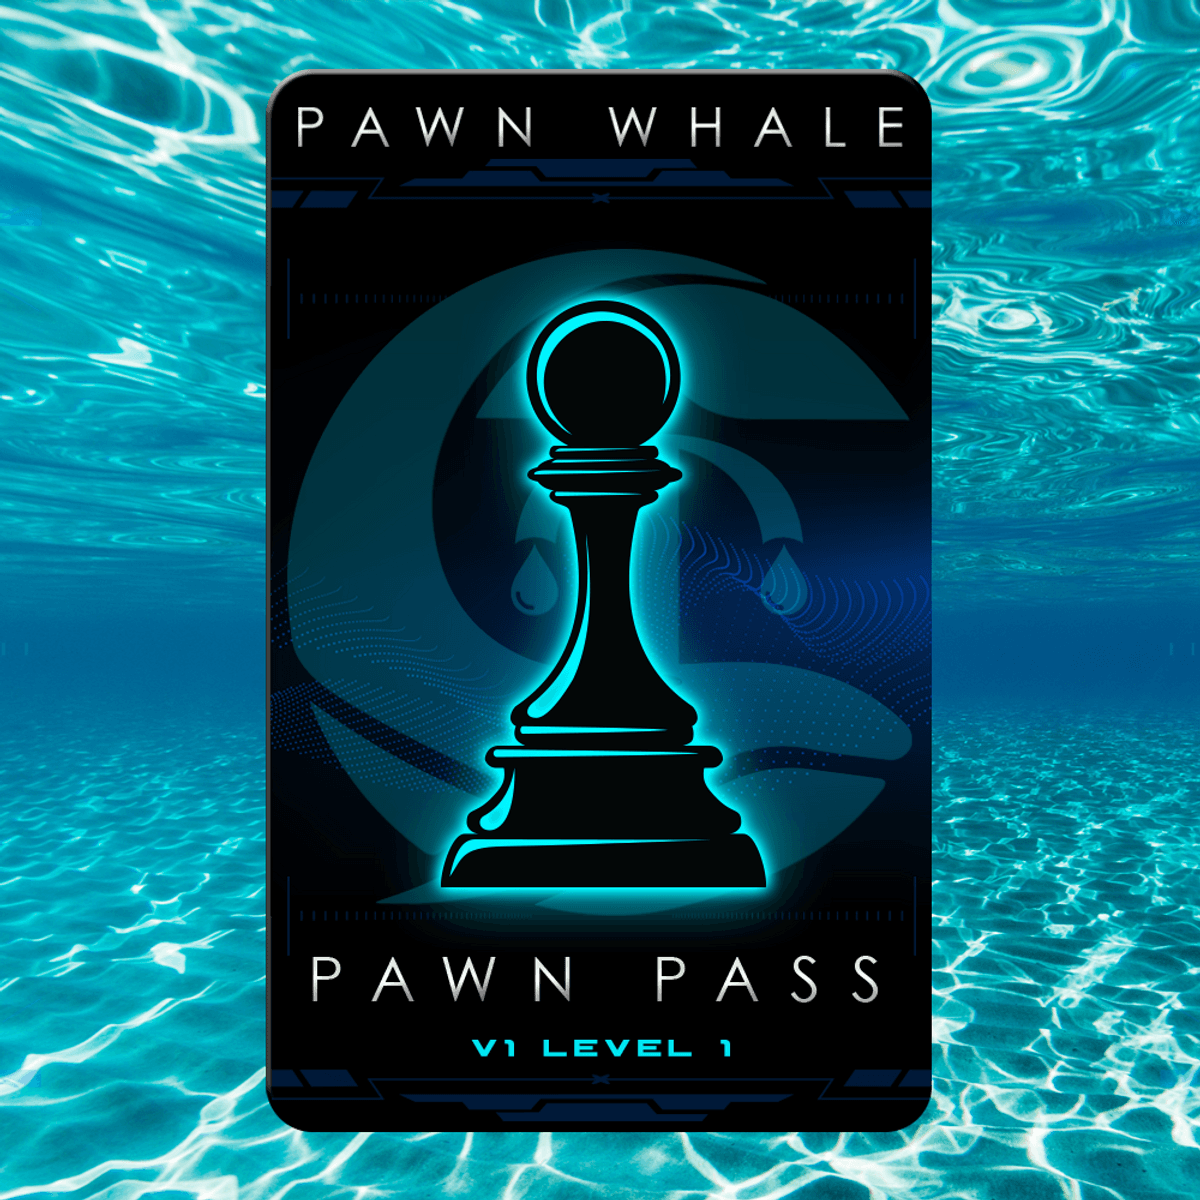 Pawn Whale Pass #2415